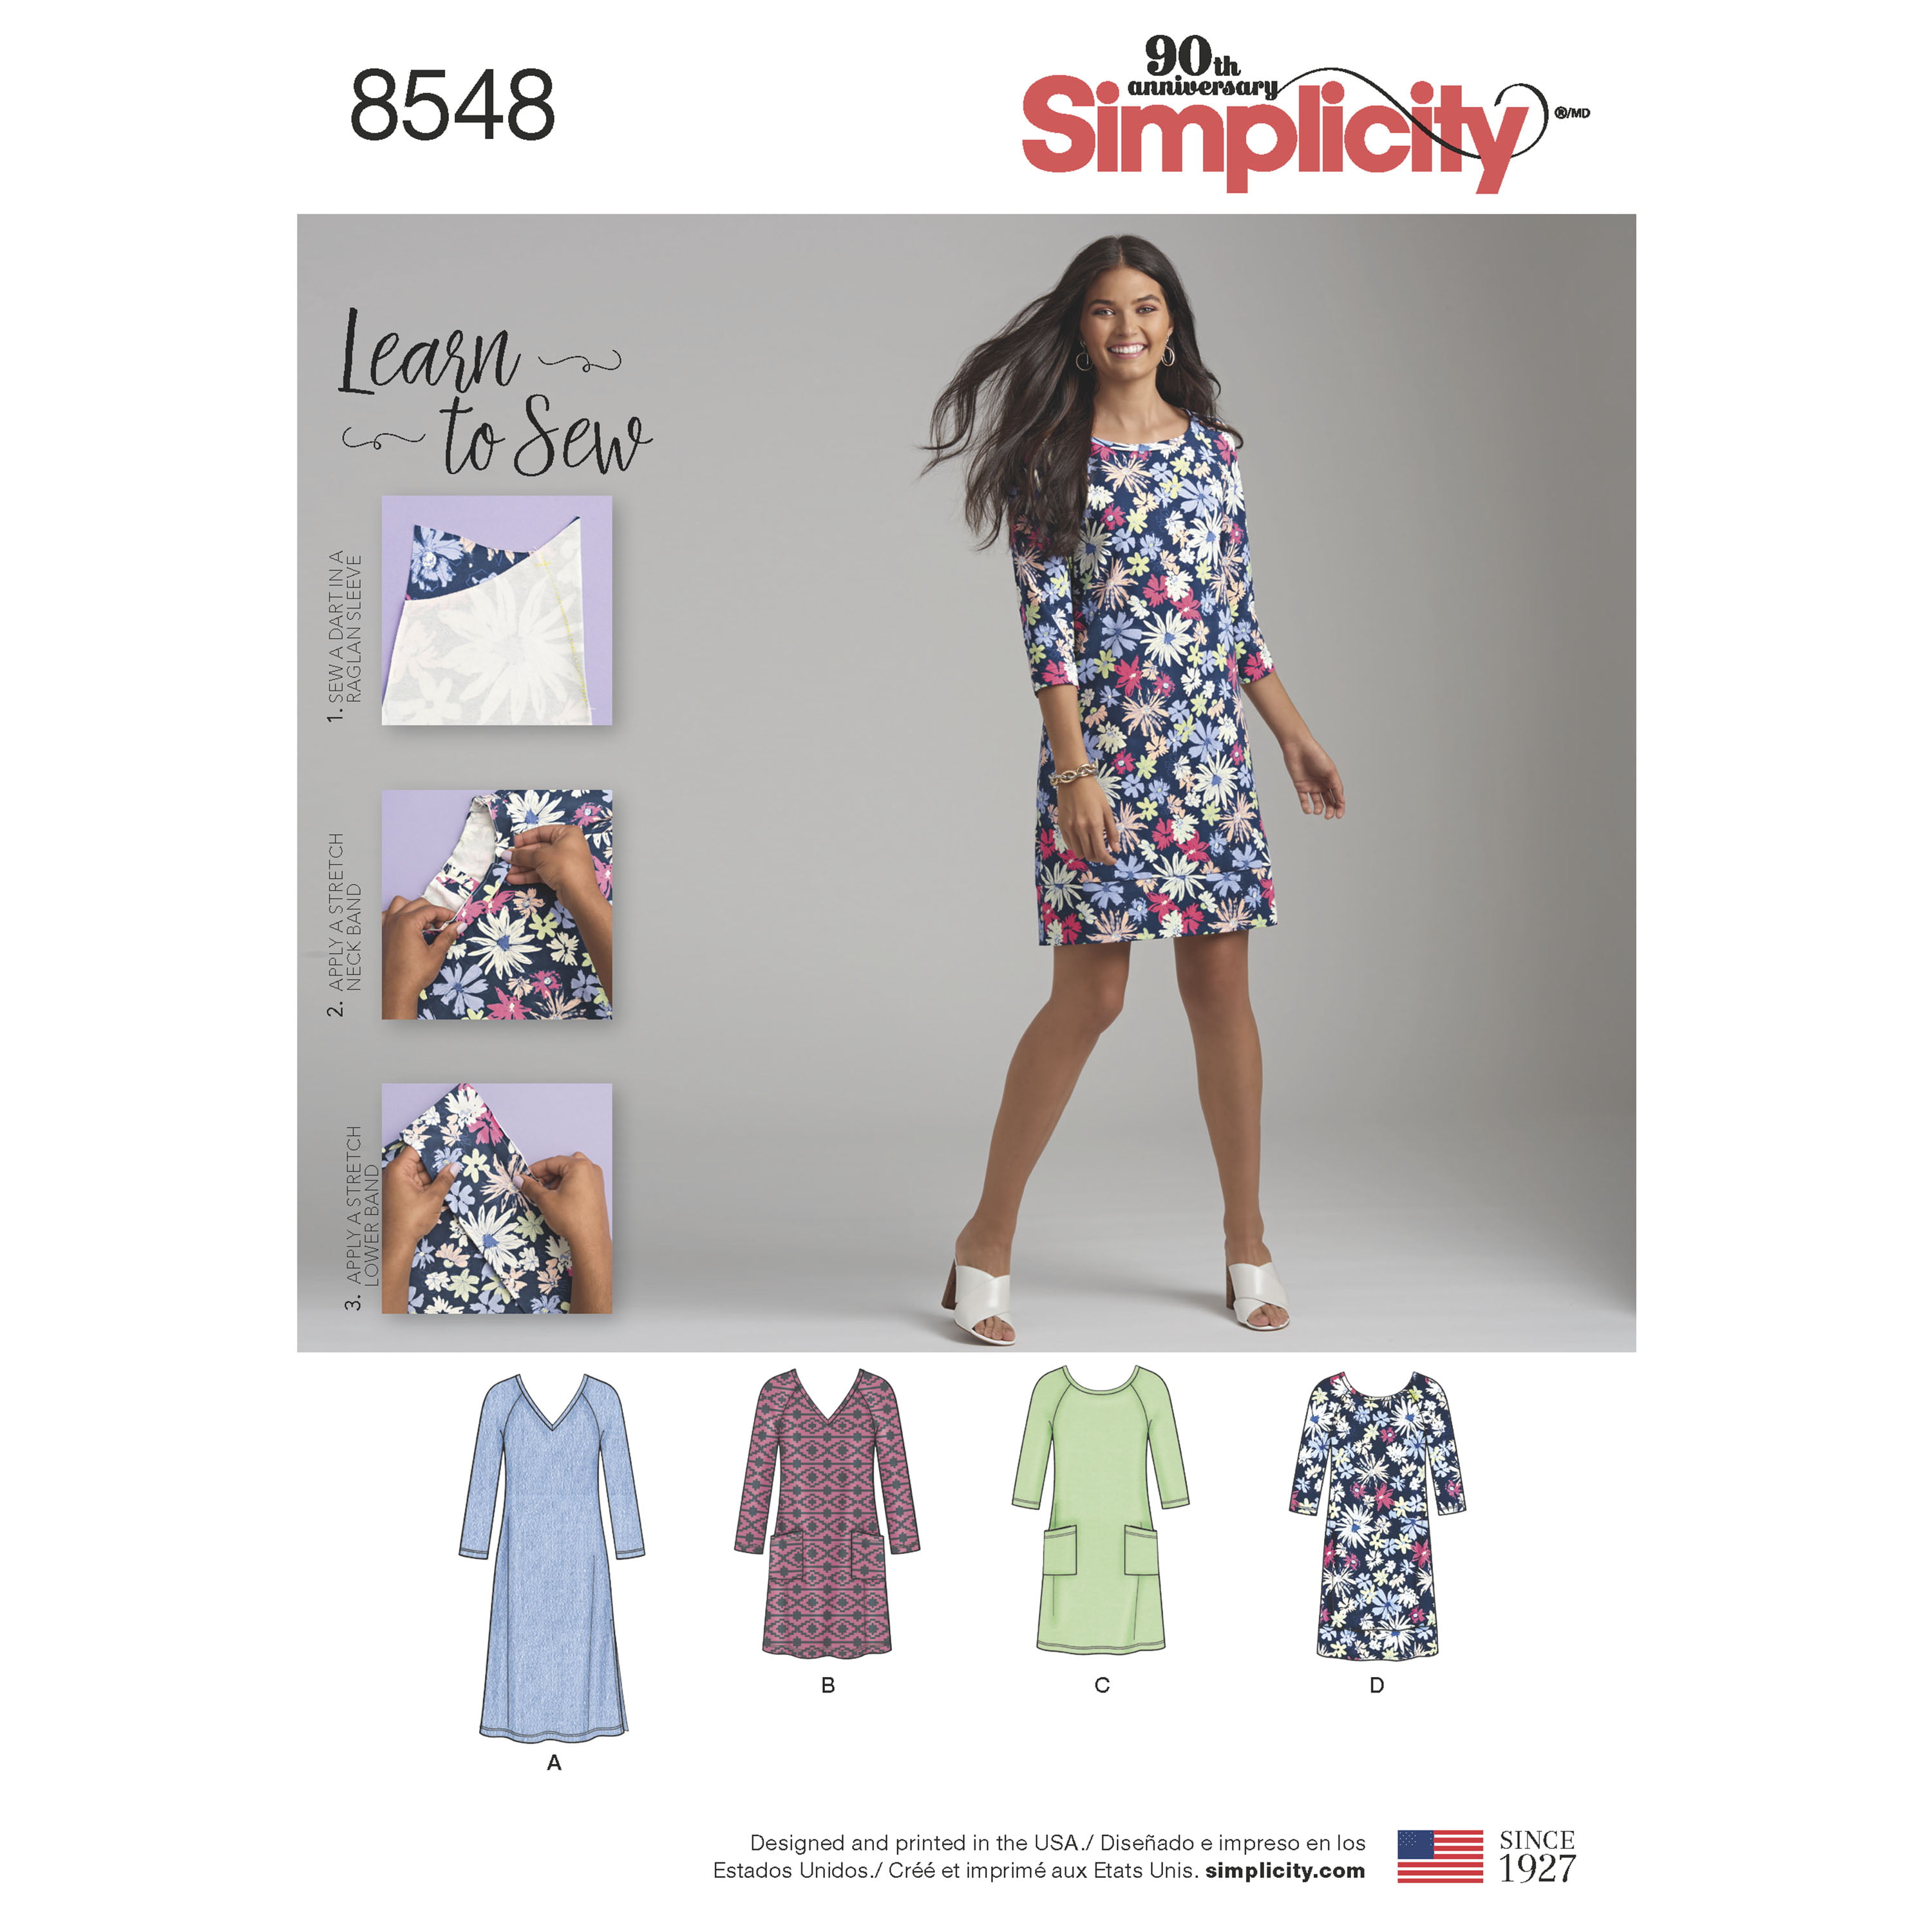 Simplicity 7982 Sewing Pattern Misses Easy to Sew Set of Lined -  in  2023